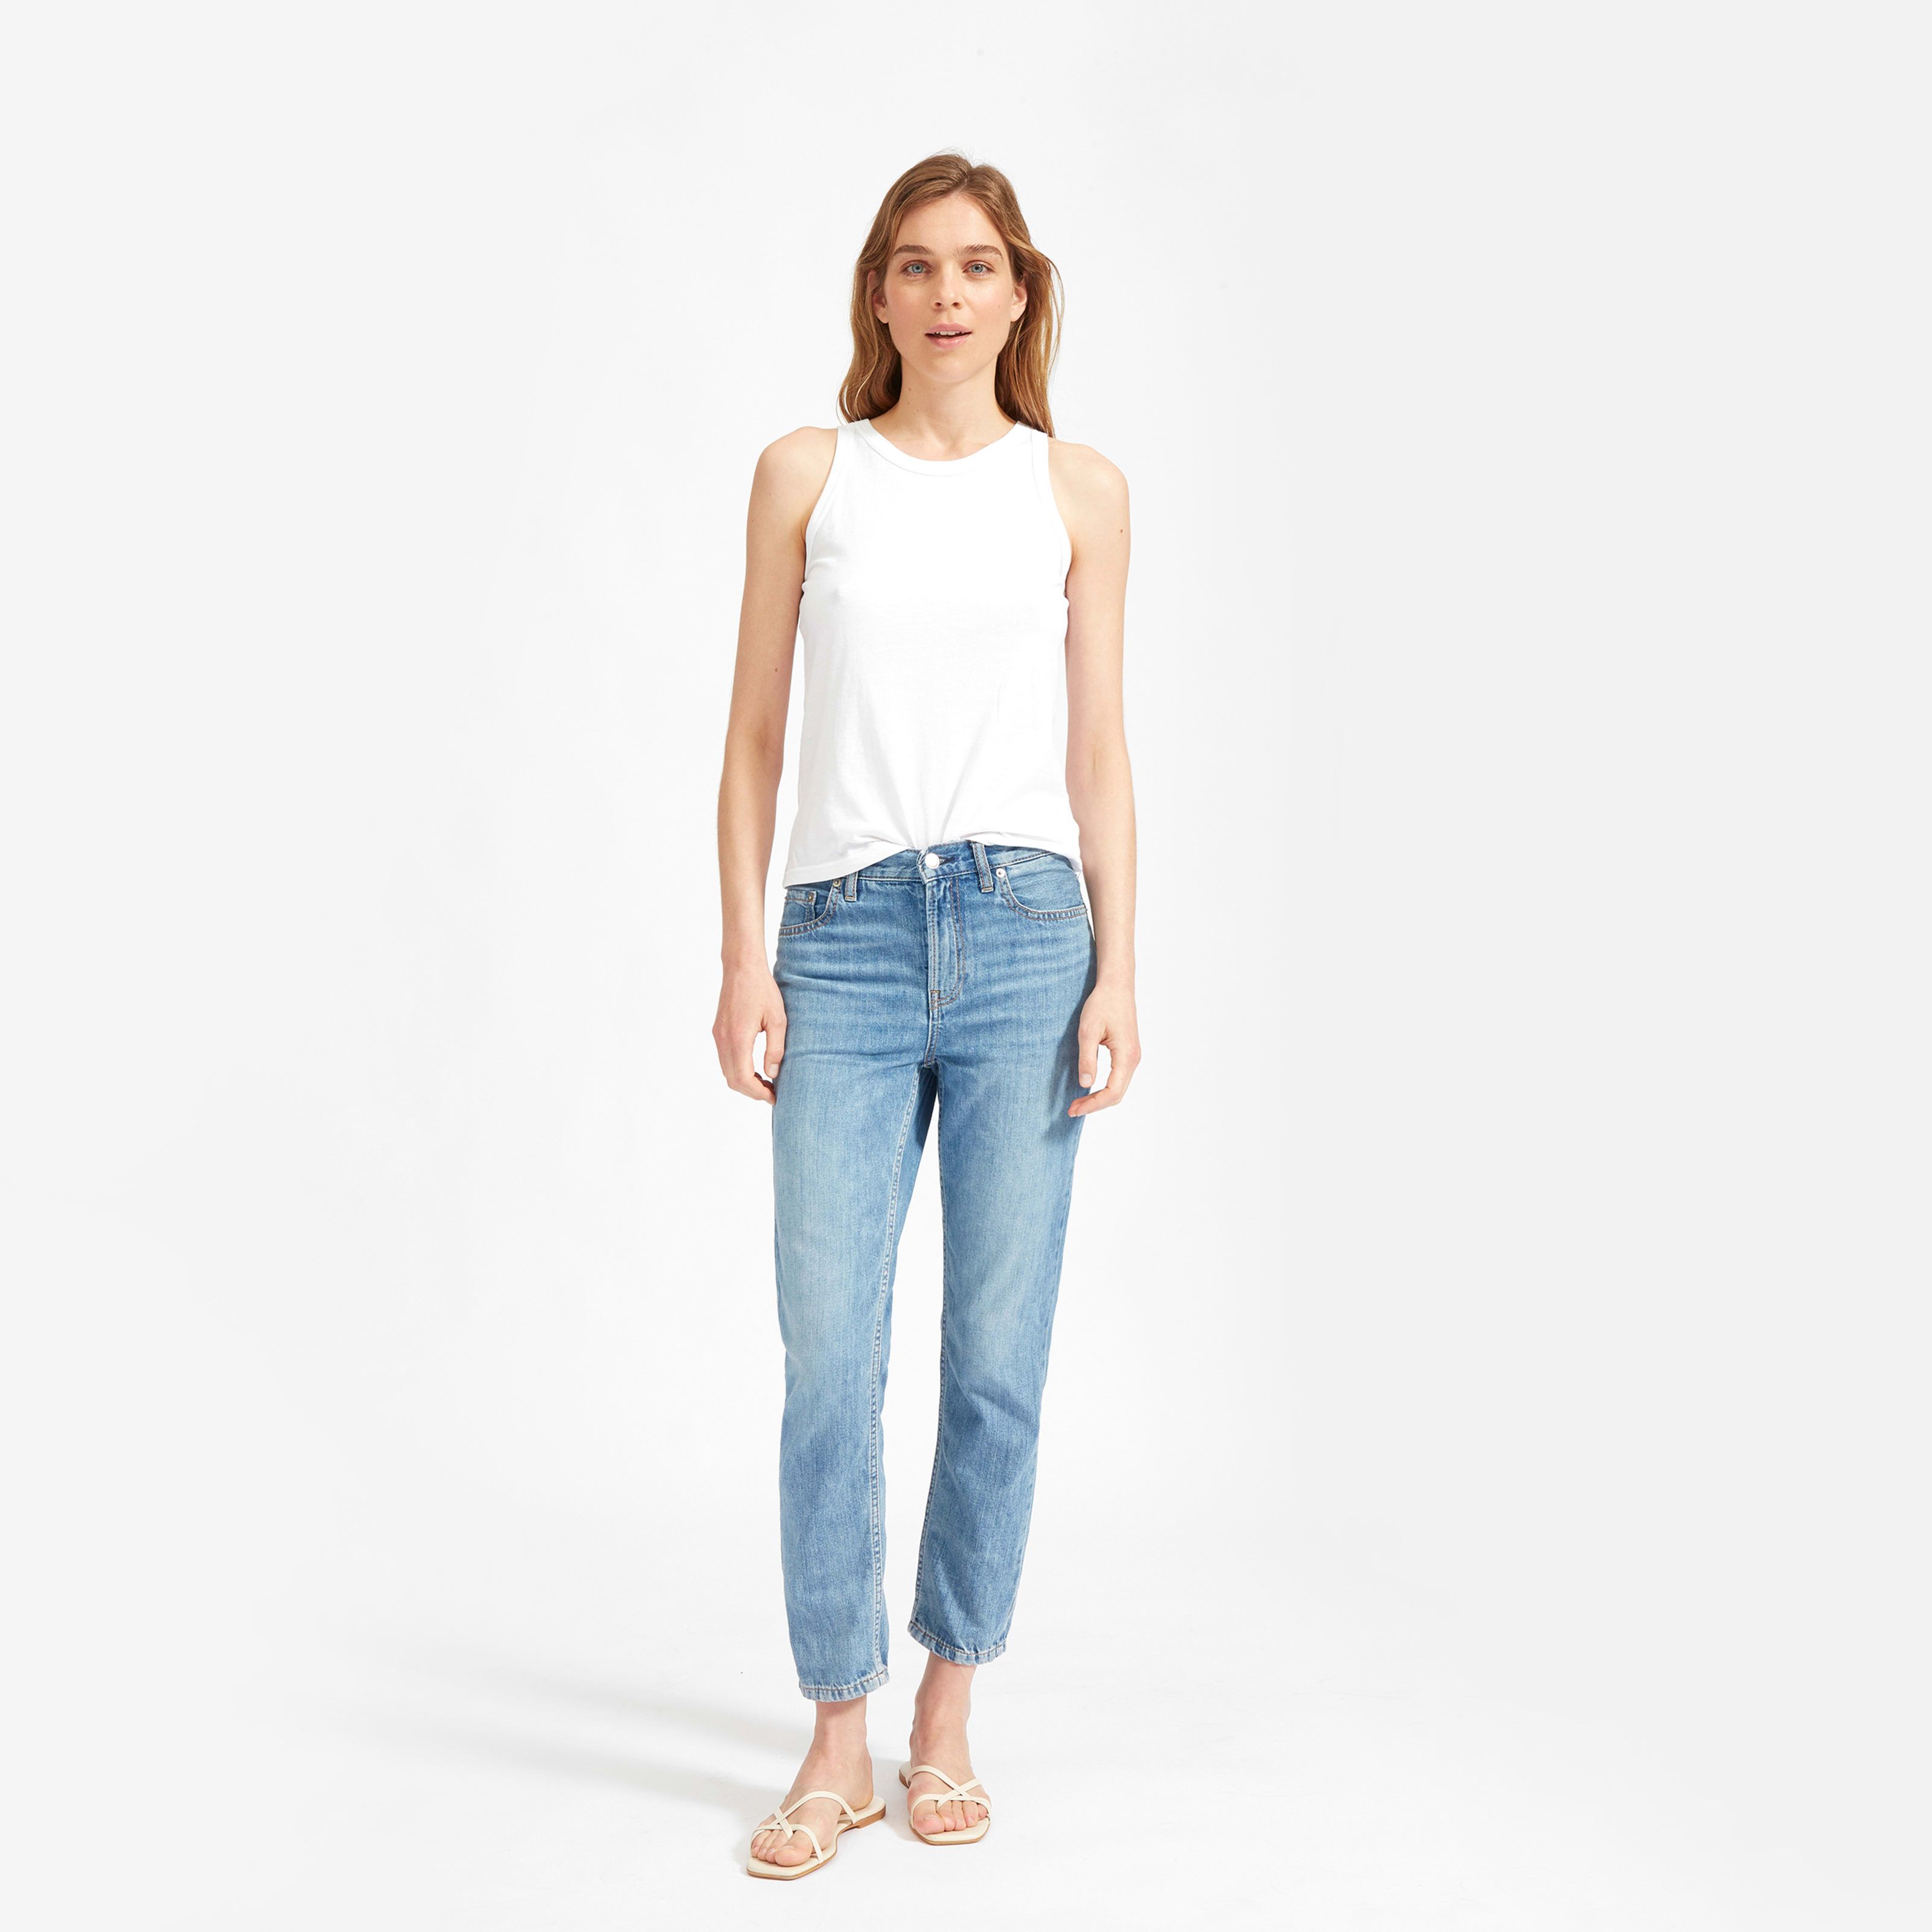 Women's Super-Soft Relaxed Jean by Everlane in Vintage Light Blue, Size 33 | Everlane